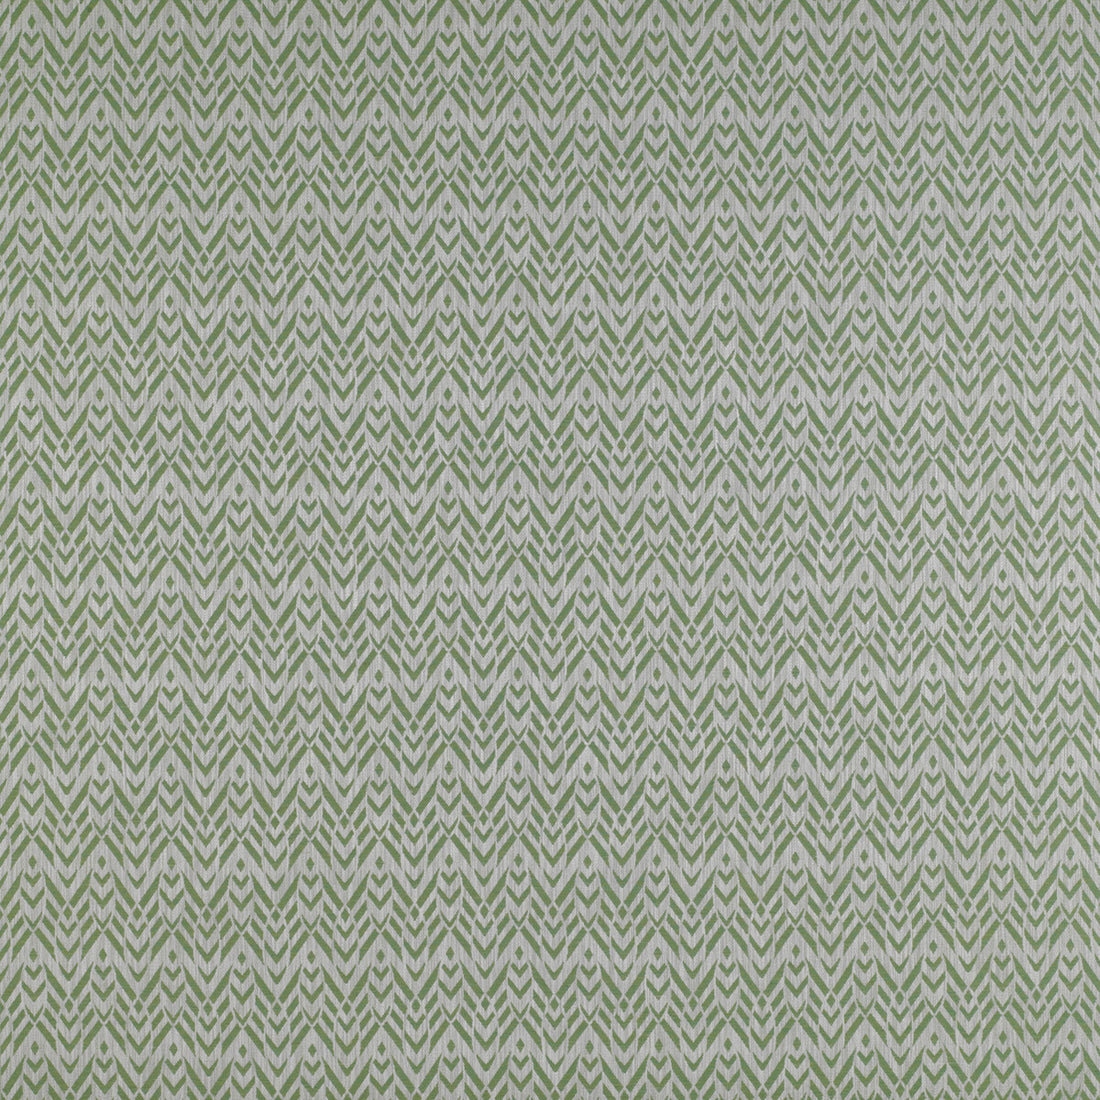 Cervantes fabric in verde color - pattern GDT5200.001.0 - by Gaston y Daniela in the Madrid collection